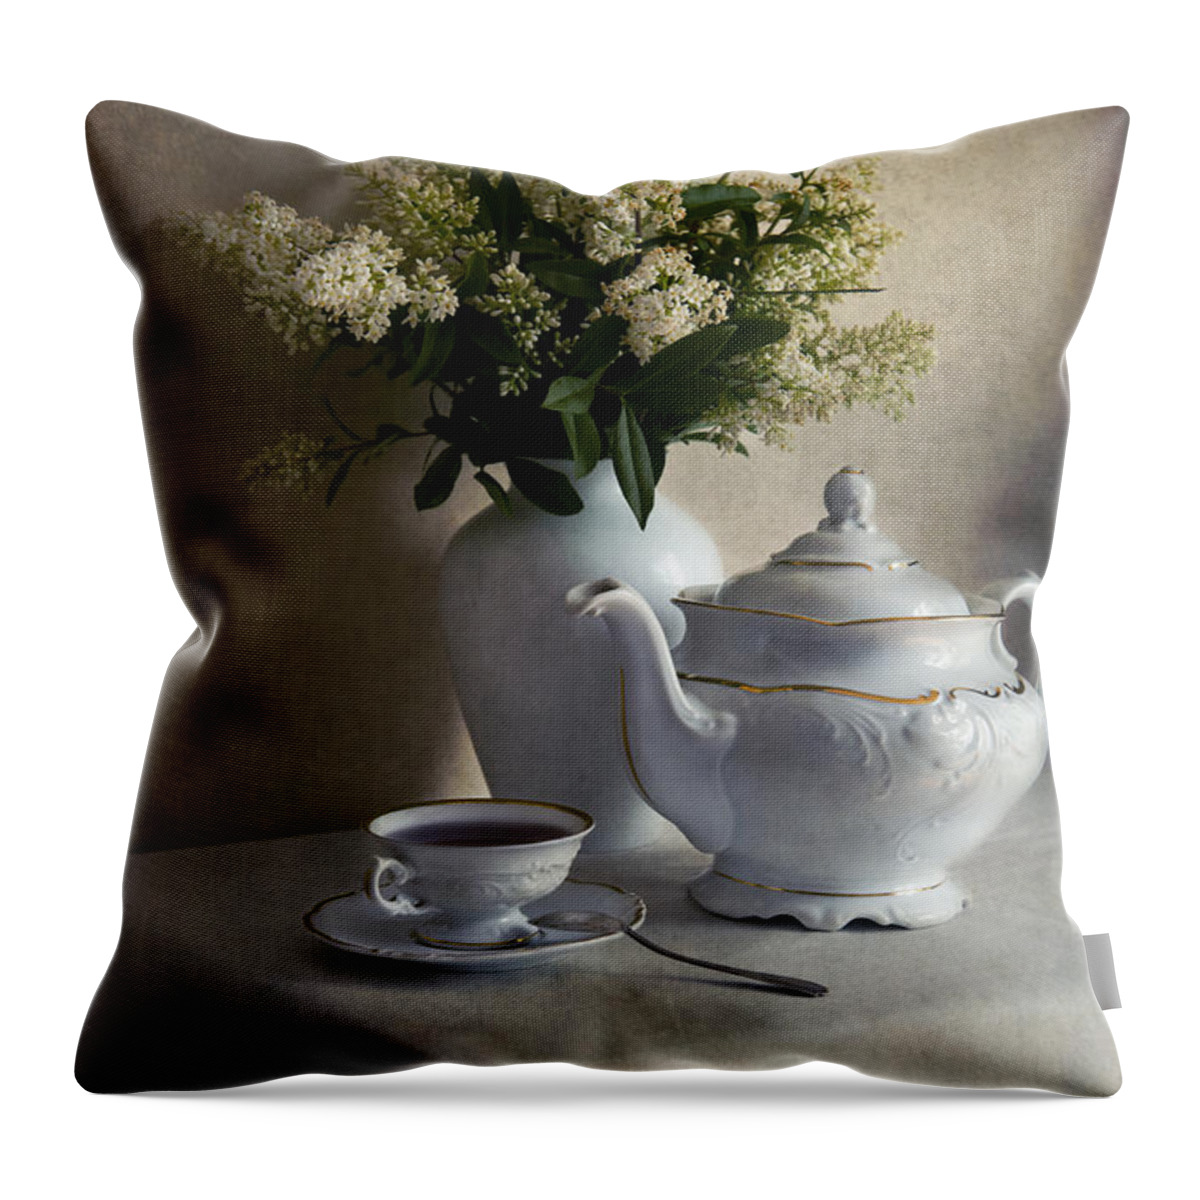 Still Life Throw Pillow featuring the photograph Still life with white tea set and bouquet of white flowers by Jaroslaw Blaminsky